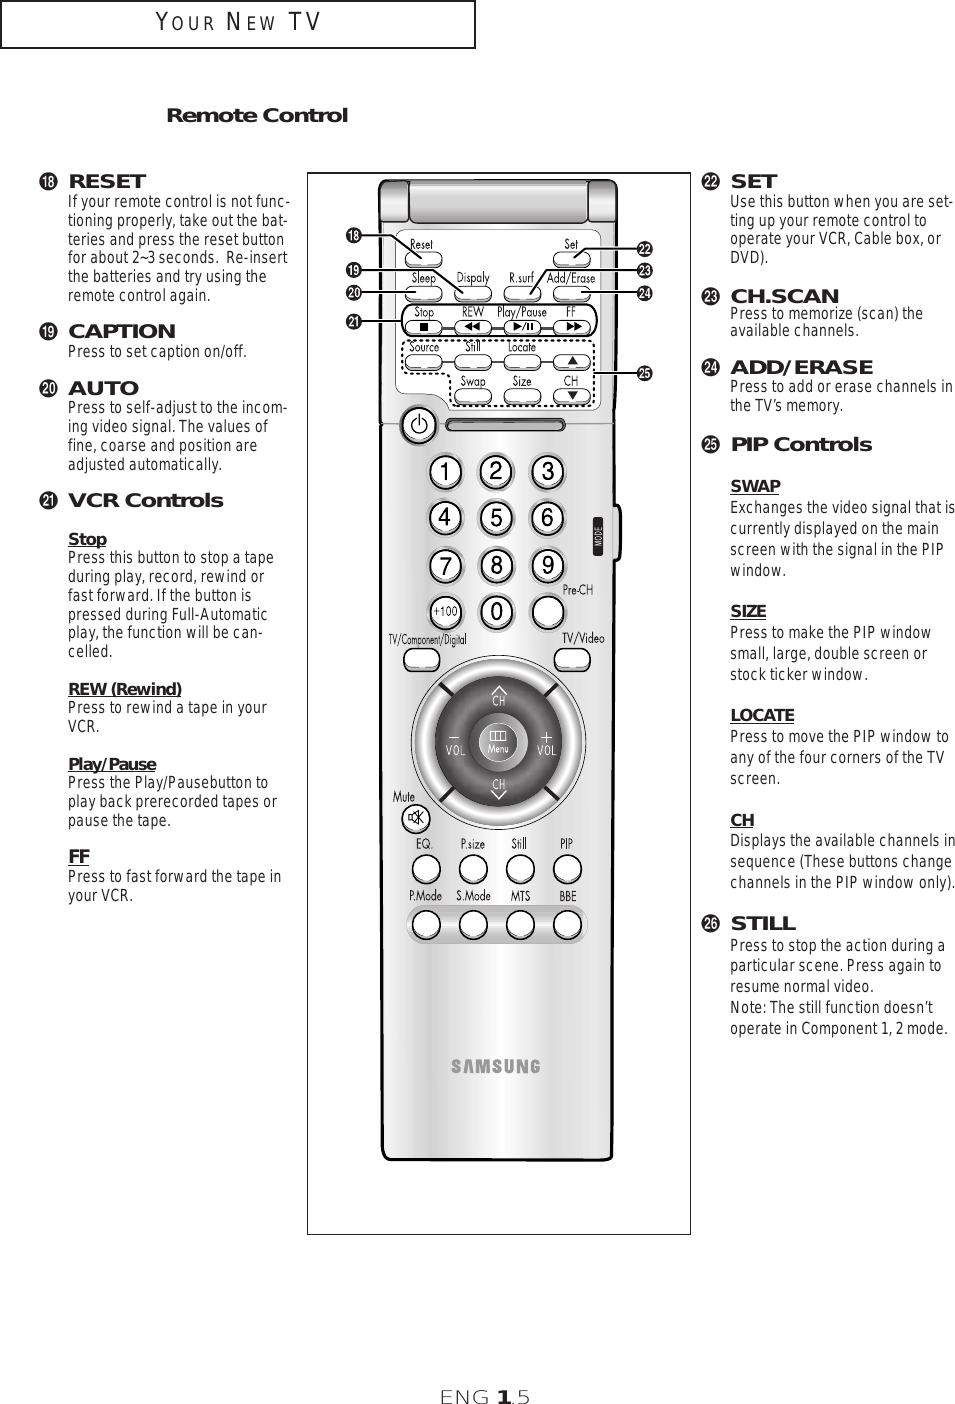 ENG 1.5Remote Control¯RESETIf your remote control is not func-tioning properly, take out the bat-teries and press the reset buttonfor about 2~3 seconds.  Re-insertthe batteries and try using theremote control again. ˘CAPTIONPress to set caption on/off.¿AUTOPress to self-adjust to the incom-ing video signal. The values offine, coarse and position areadjusted automatically.¸VCR ControlsStopPress this button to stop a tapeduring play, record, rewind orfast forward. If the button ispressed during Full-Automaticplay, the function will be can-celled.REW (Rewind)Press to rewind a tape in yourVCR.Play/PausePress the Play/Pausebutton toplay back prerecorded tapes orpause the tape.FFPress to fast forward the tape inyour VCR.˛SETUse this button when you are set-ting up your remote control tooperate your VCR, Cable box, orDVD). ◊CH.SCANPress to memorize (scan) theavailable channels.±ADD/ERASEPress to add or erase channels inthe TV’s memory.≠PIP ControlsSWAPExchanges the video signal that iscurrently displayed on the main screen with the signal in the PIPwindow.SIZEPress to make the PIP windowsmall, large, double screen orstock ticker window.LOCATEPress to move the PIP window toany of the four corners of the TVscreen.CHDisplays the available channels insequence (These buttons changechannels in the PIP window only).–STILLPress to stop the action during a particular scene. Press again toresume normal video.Note: The still function doesn’toperate in Component 1, 2 mode.YOUR NEW TV